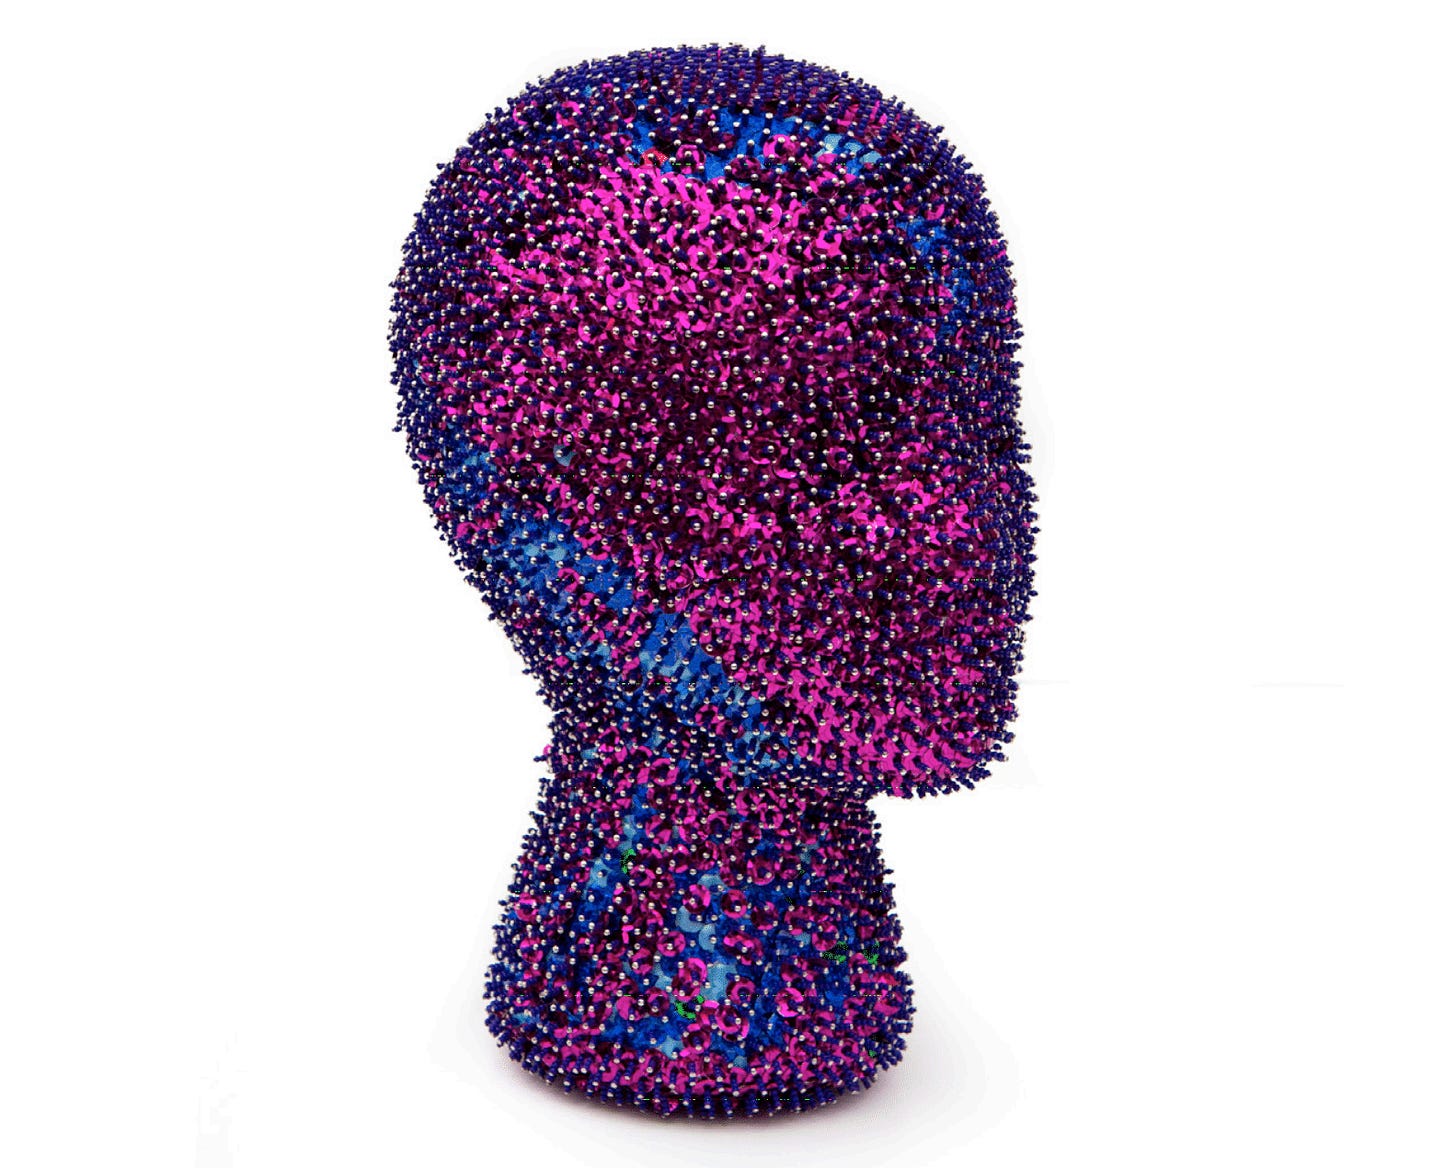 A mixed media sculpture of a nondescript head has lots of shiny purples and pinks and blues with what looks like pins that cover the entire surface.